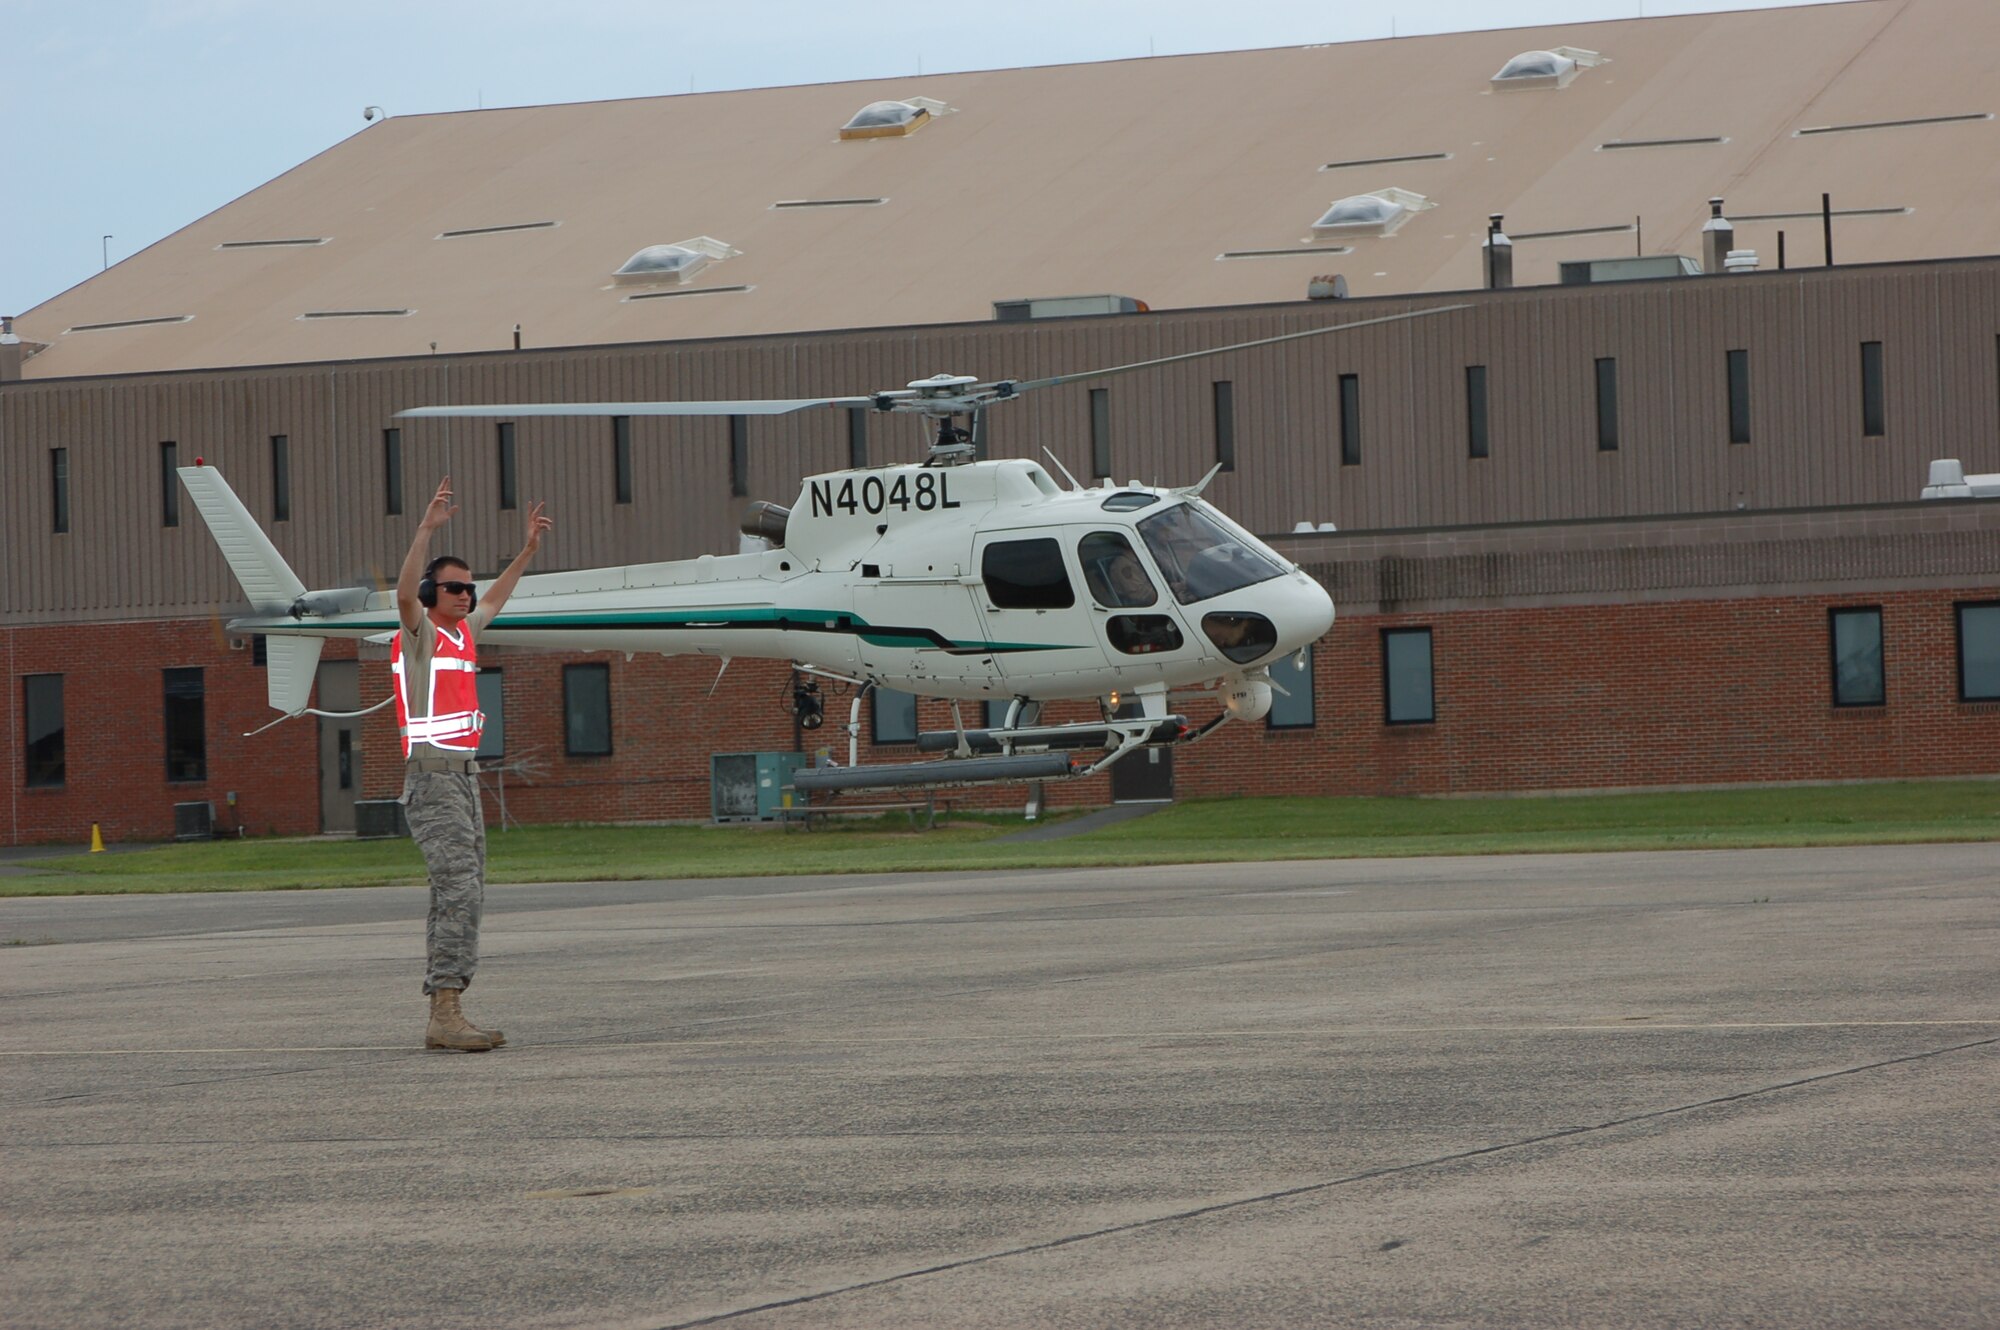 Tech. Sgt. Joshua Marks, crew chief, 103rd Aircraft Maintenance Squadron, gives direction to a Department of Homeland Security AS350B helicopter as it lands at Bradley ANG Base, East Granby, Conn. for Space and Aviation Day July 18, 2009. The helicopter was flown by Maj. Brian Hebert, C-21 pilot, 103rd Airlift Squadron.  It is estimated that approximately 5,000 people came through the gates of the base to check out the static displays.  (U.S. Air Force photos by Tech. Sgt. Joshua Mead)